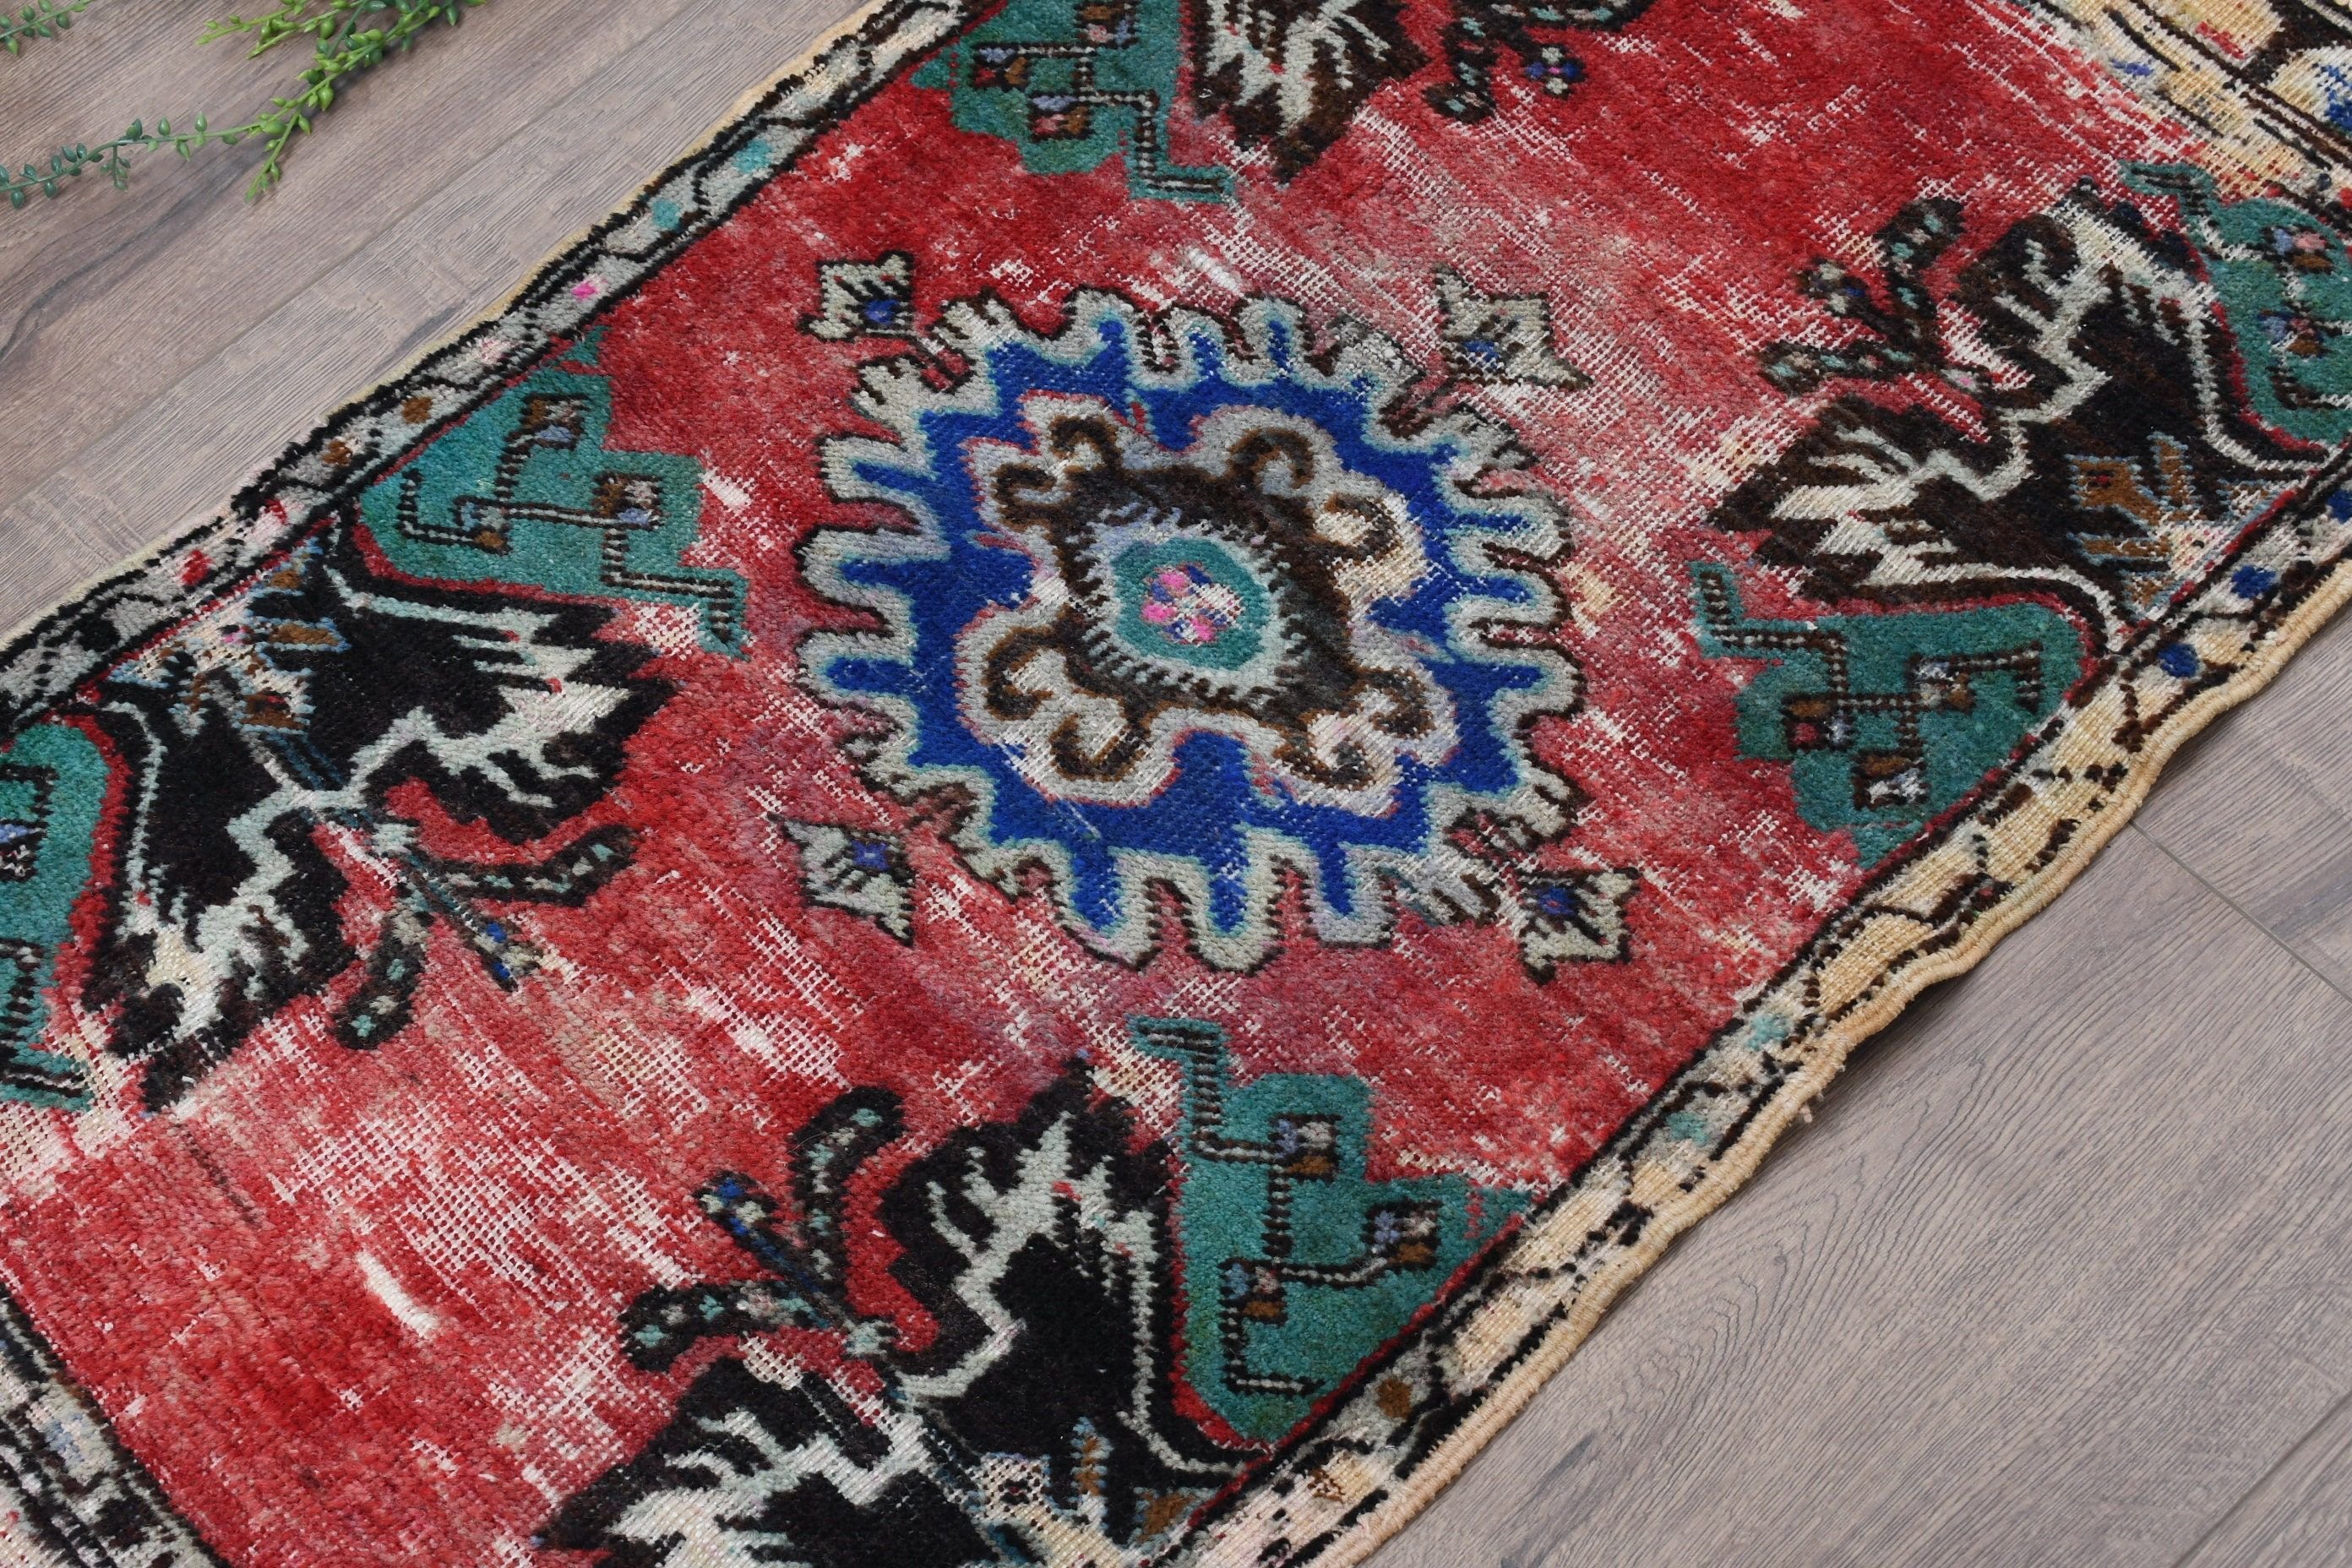 Turkish Rugs, Cool Rugs, Rugs for Kitchen, Organic Rug, Red Home Decor Rug, Door Mat Rugs, Kitchen Rug, 1.8x3.1 ft Small Rug, Vintage Rugs